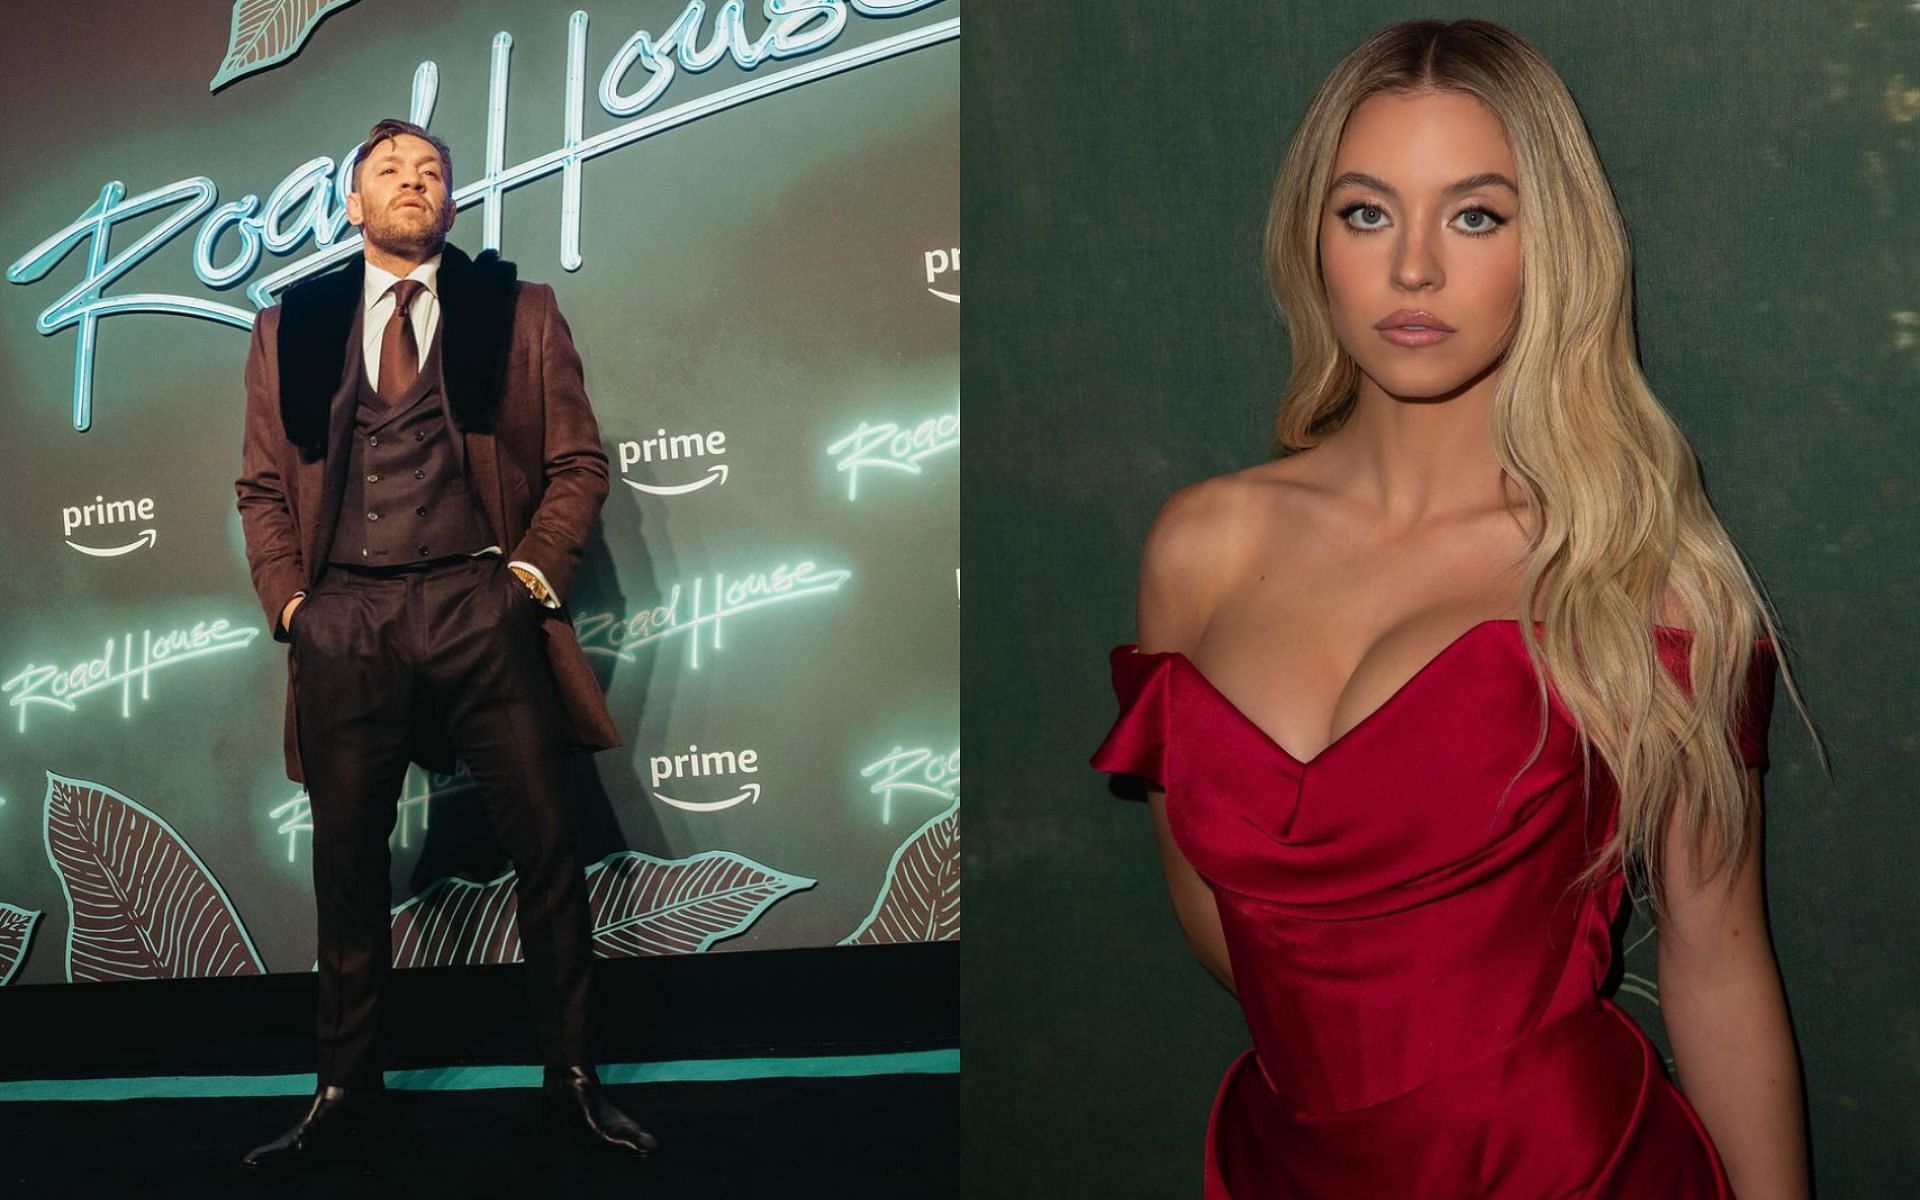 Conor McGregor (left) leaves a comment under Sydney Sweeney